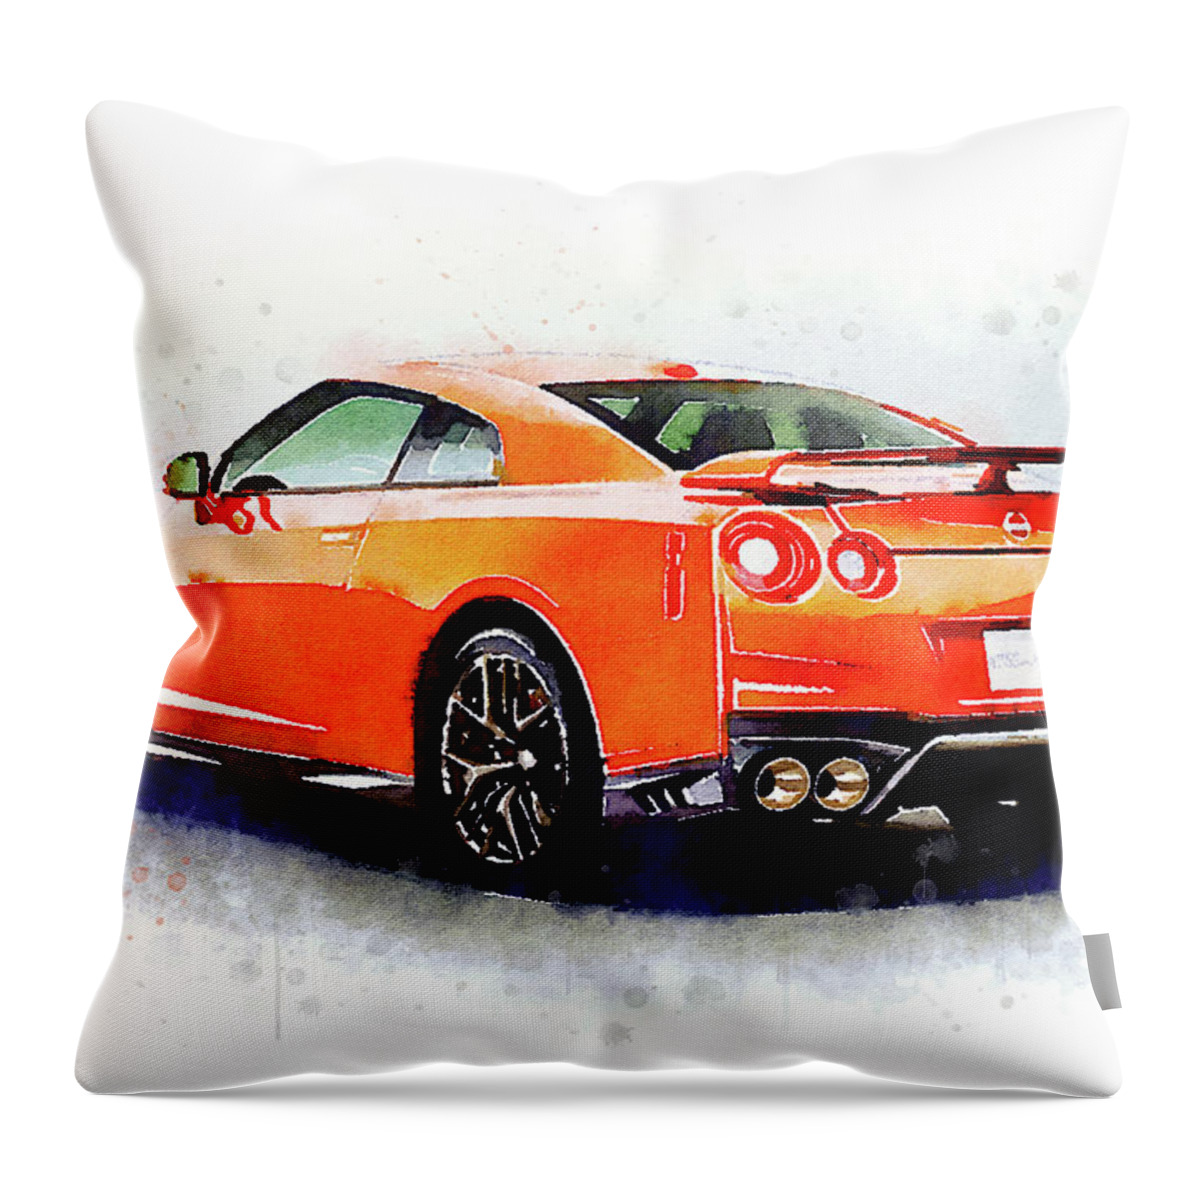 Watercolor Throw Pillow featuring the painting Watercolor Nissan GT-R - oryginal artwork by Vart. by Vart